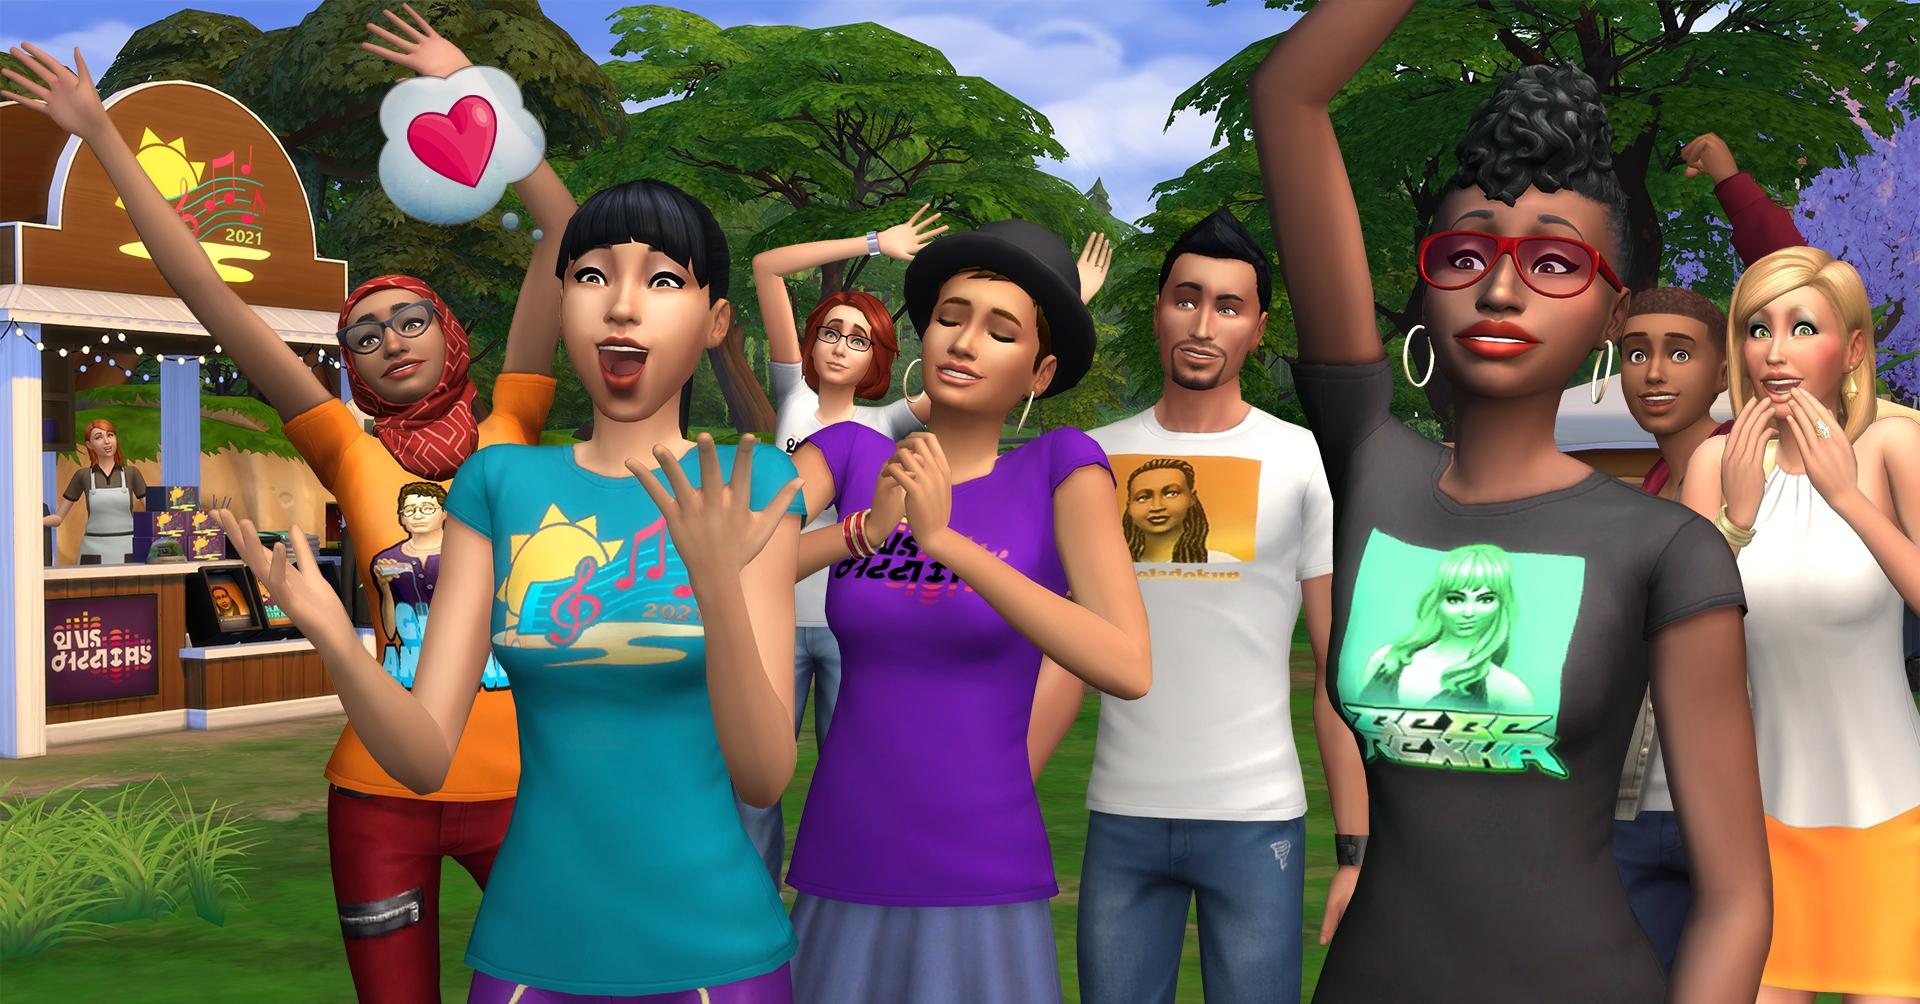 ONLINE, BLIND DATING & CHATROOMS MOD  The Sims 4: SIMDA DATING APP REVIEW!  